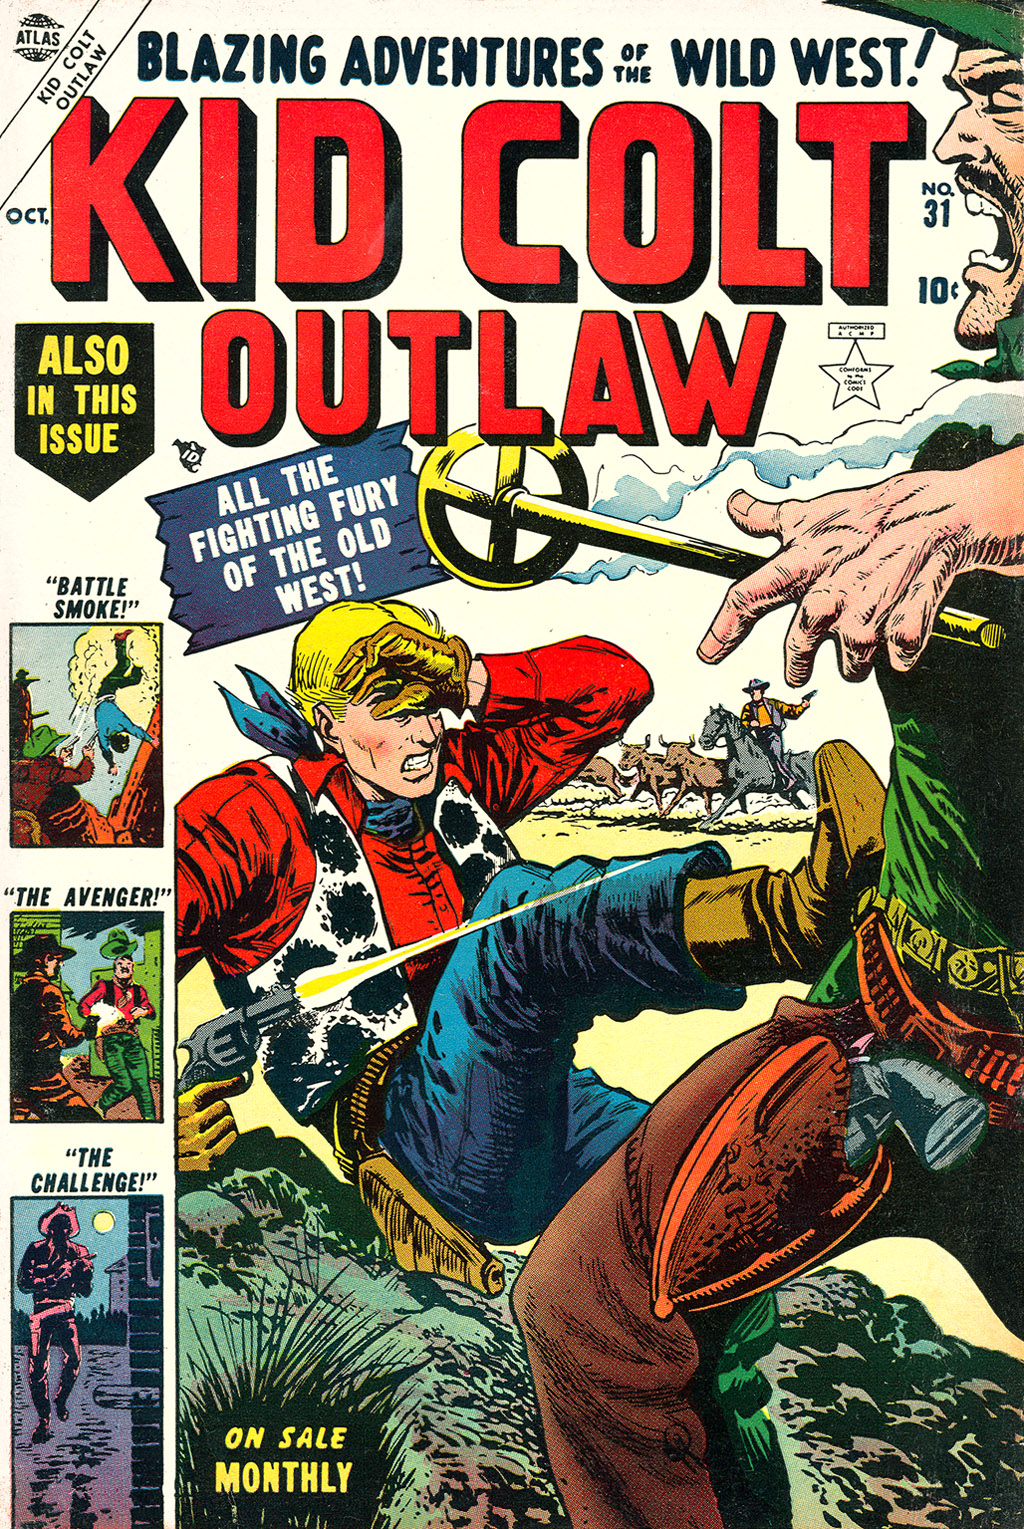 Read online Kid Colt Outlaw comic -  Issue #31 - 1